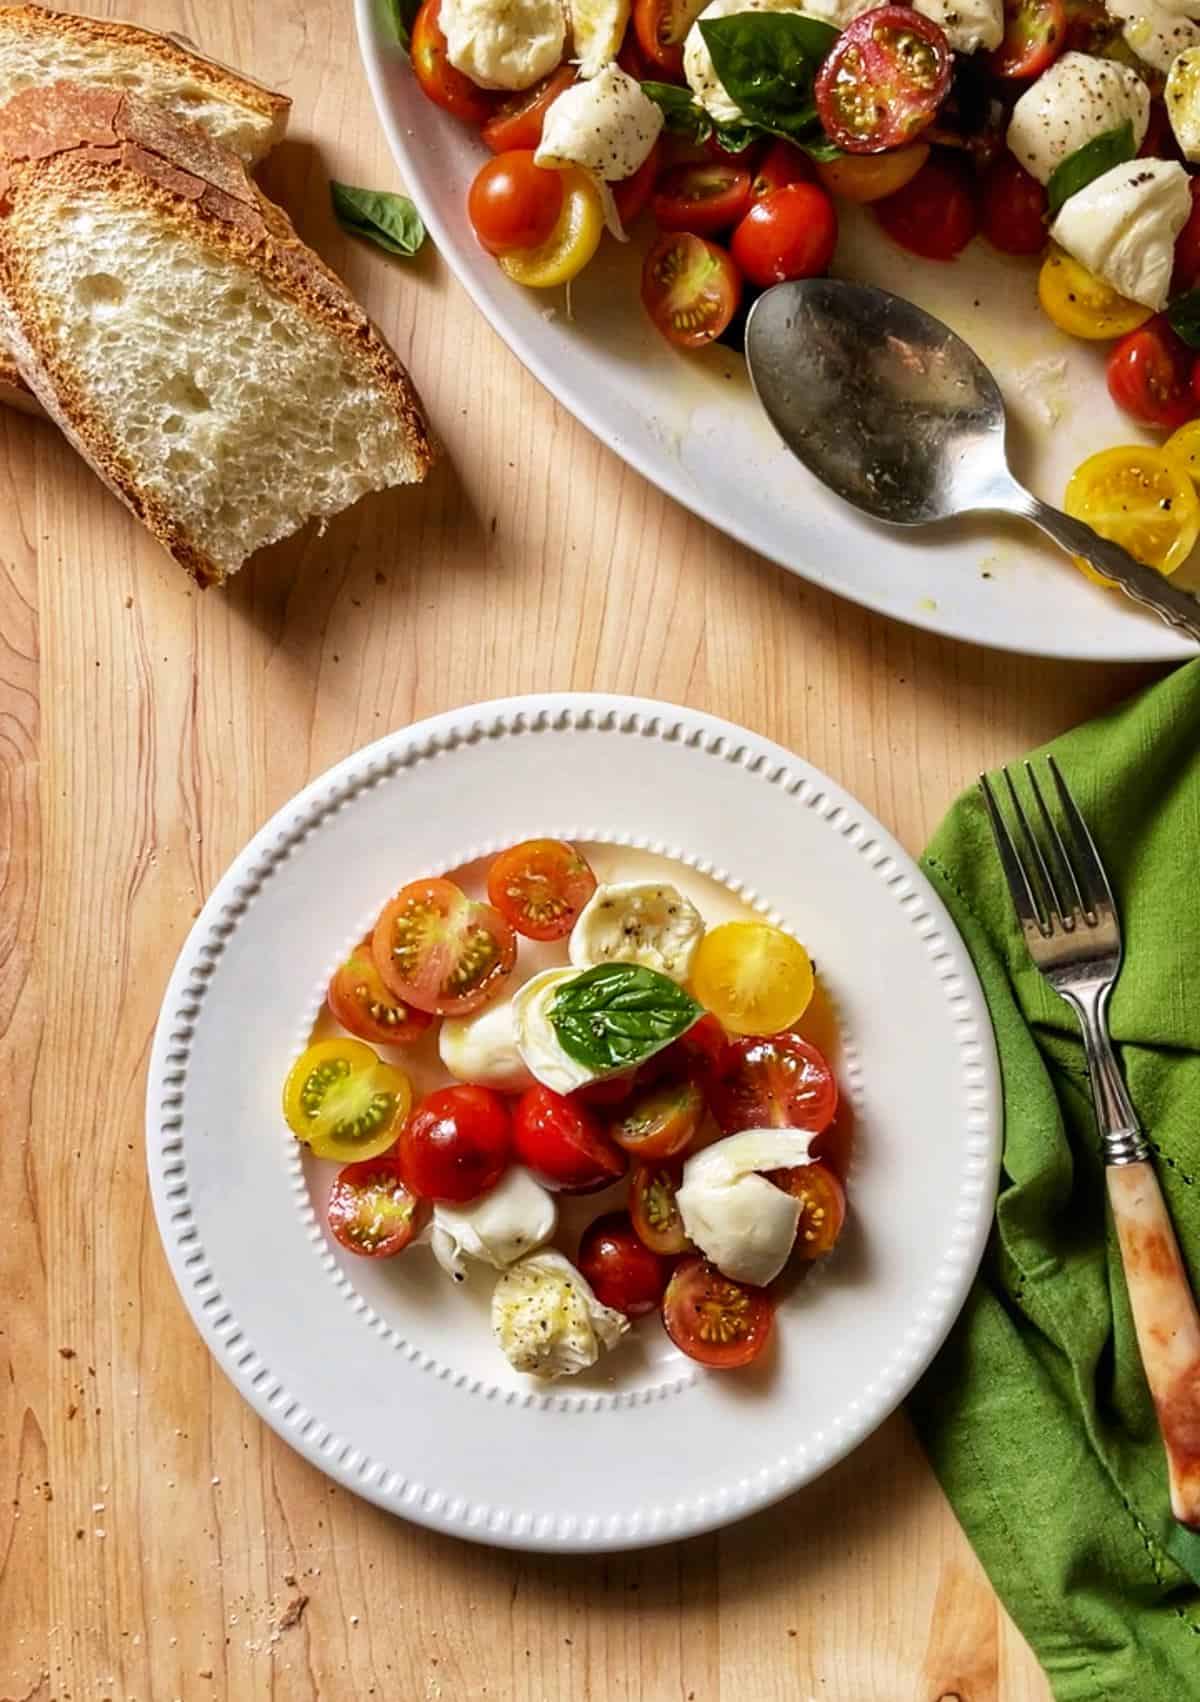 A caprese salad made with cherry tomatoes on a white plate.